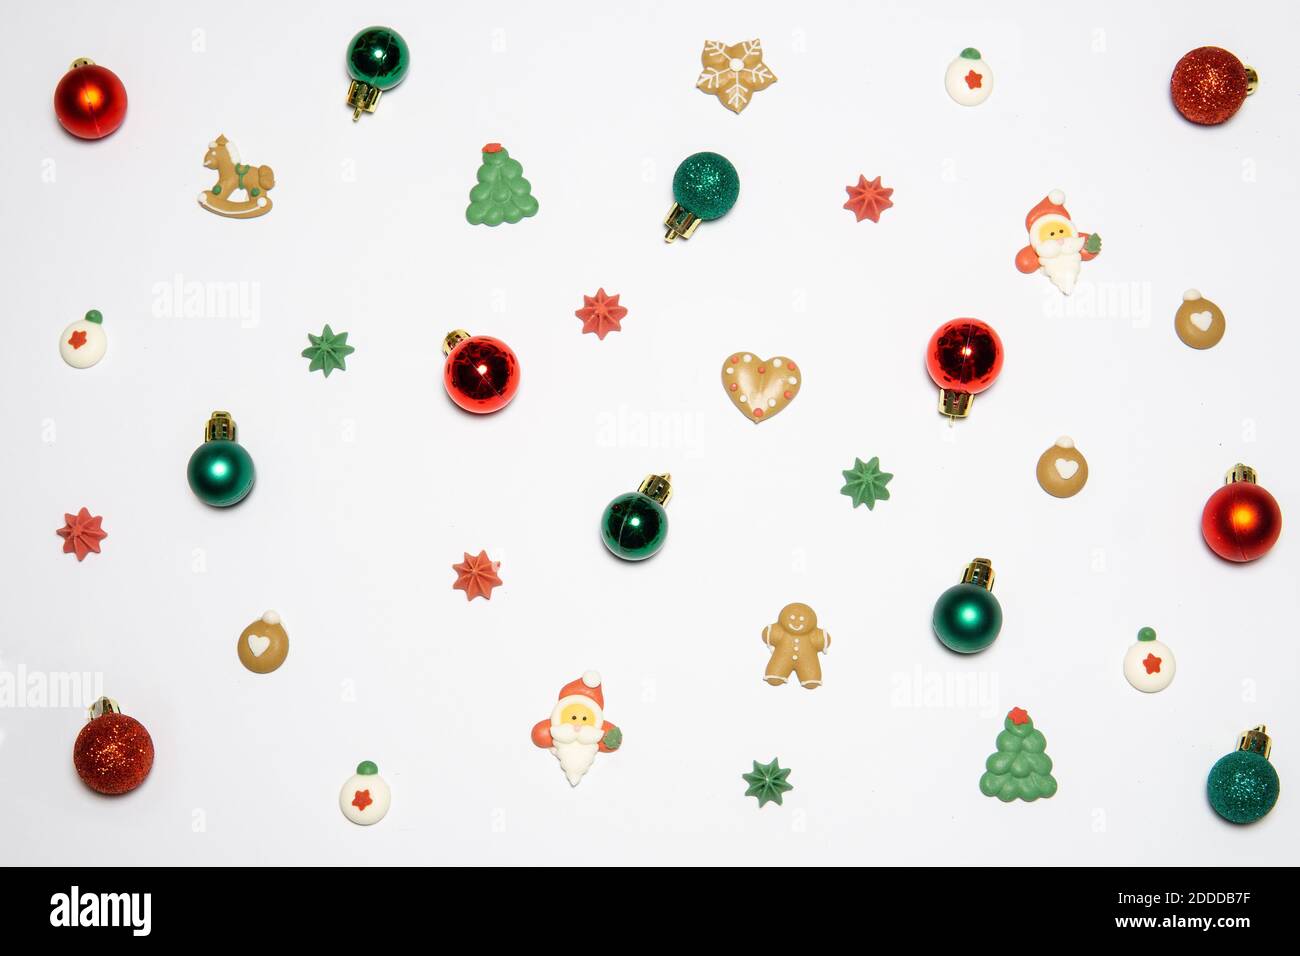 Creative layout made of Christmas decorations. Flat lay Christmas concept Stock Photo